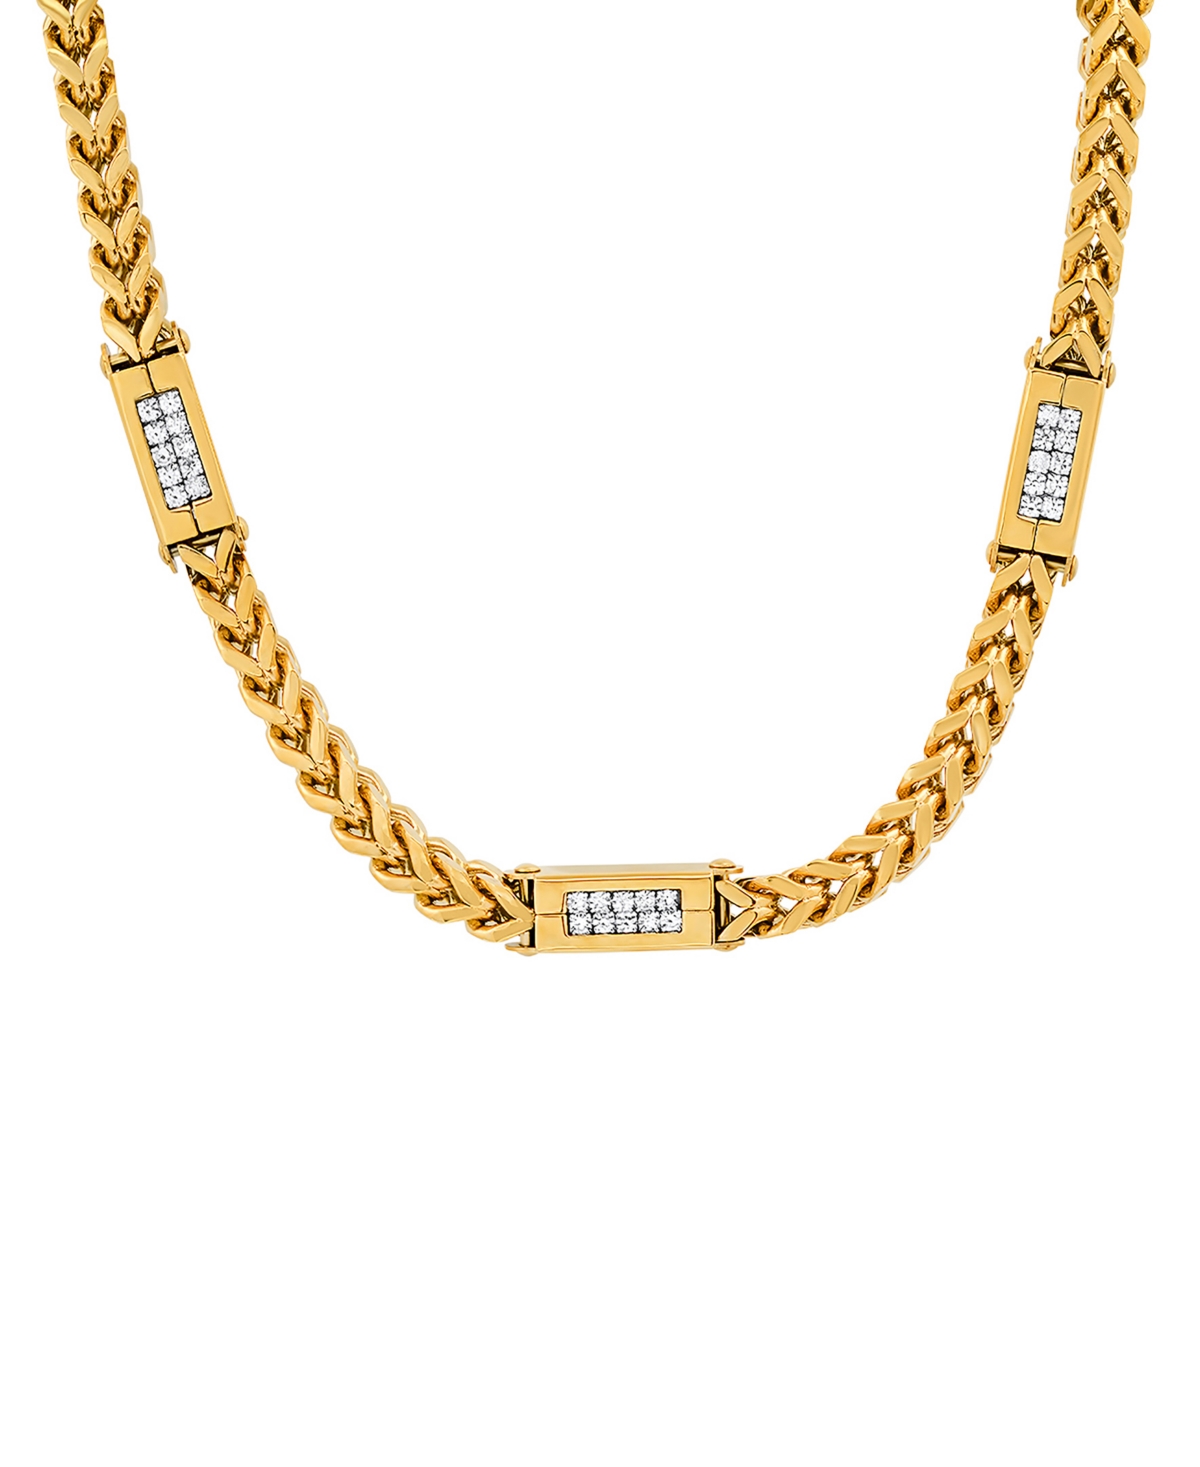 Men's 18k Gold Plated Stainless Steel Wheat Chain and Simulated Diamonds Link Necklace - Gold Plated